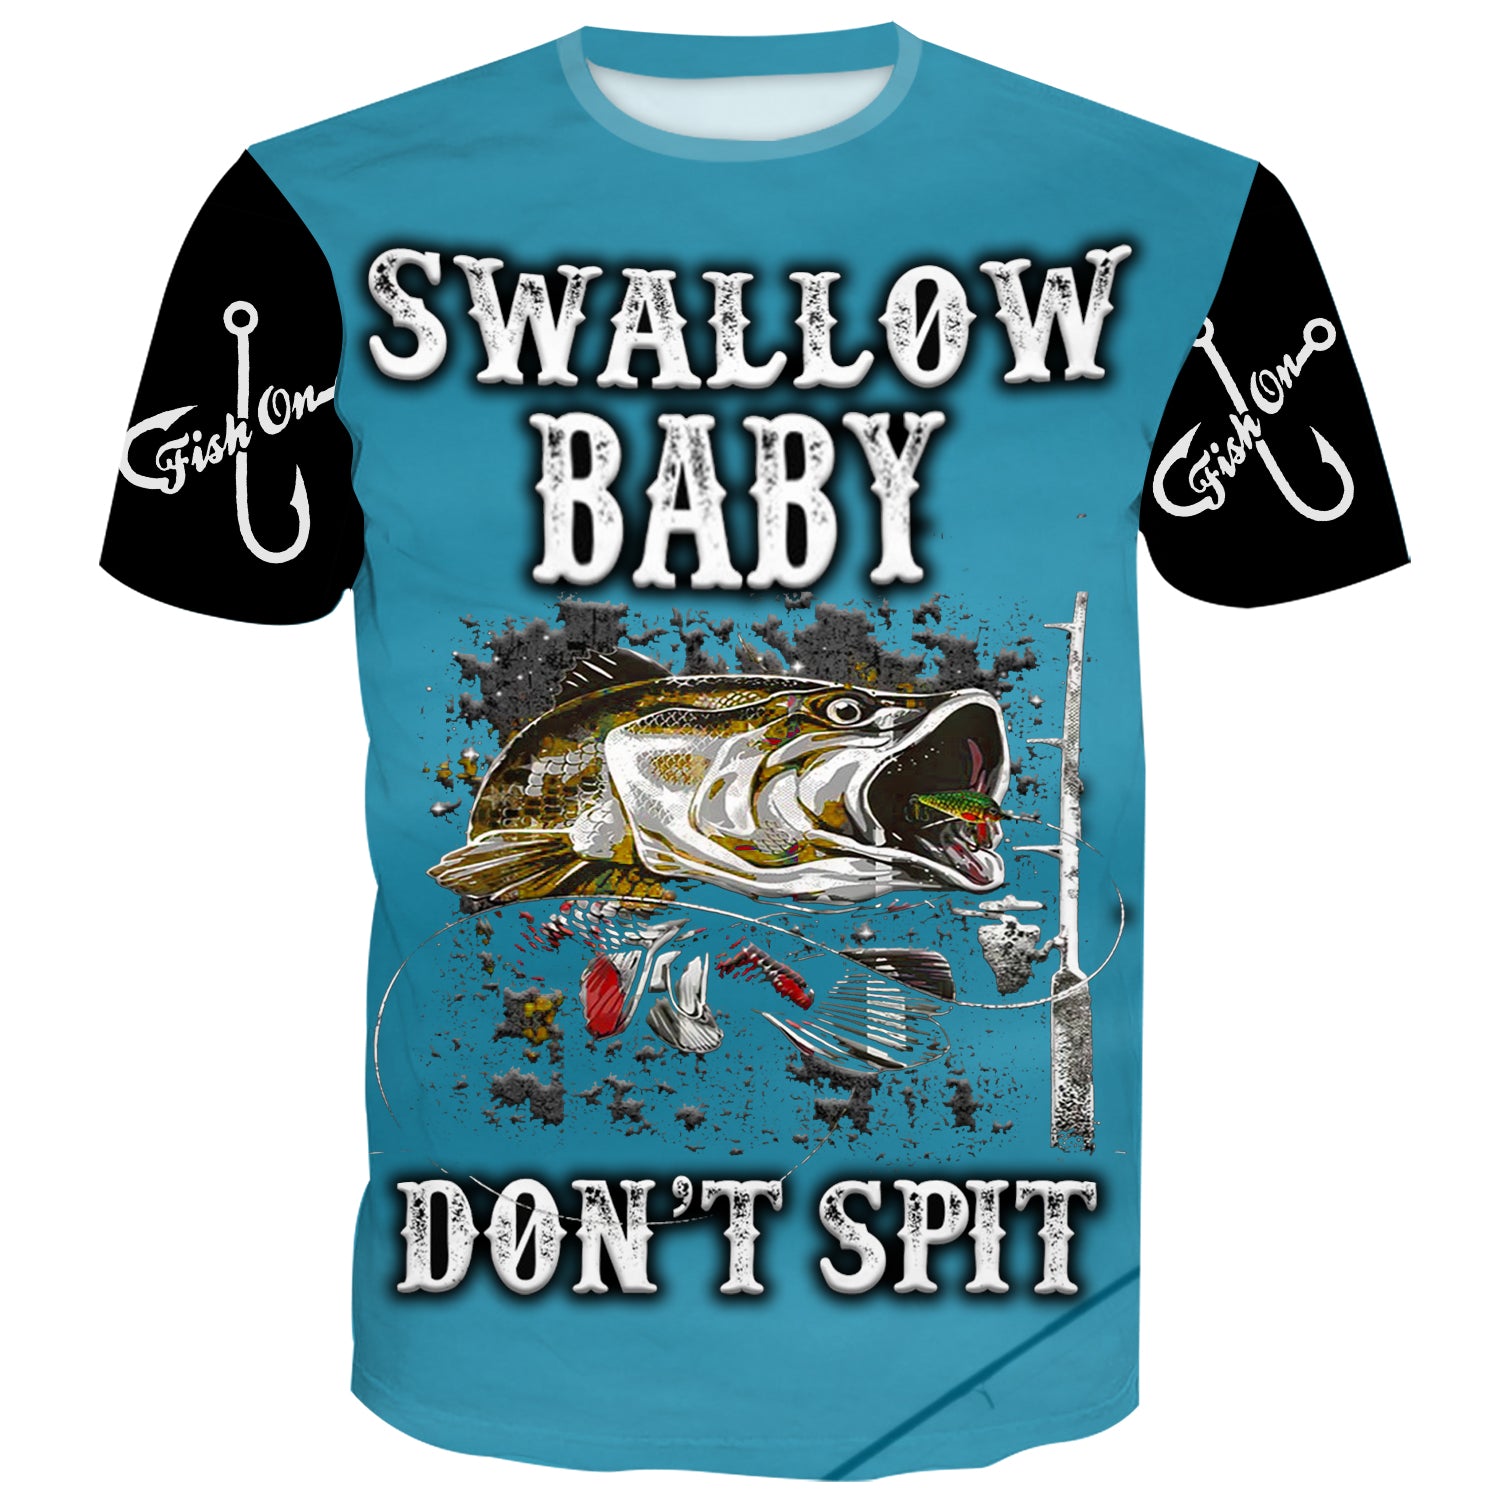 Swallow Baby, Don't Spit - Multiple Dark Color T-Shirts